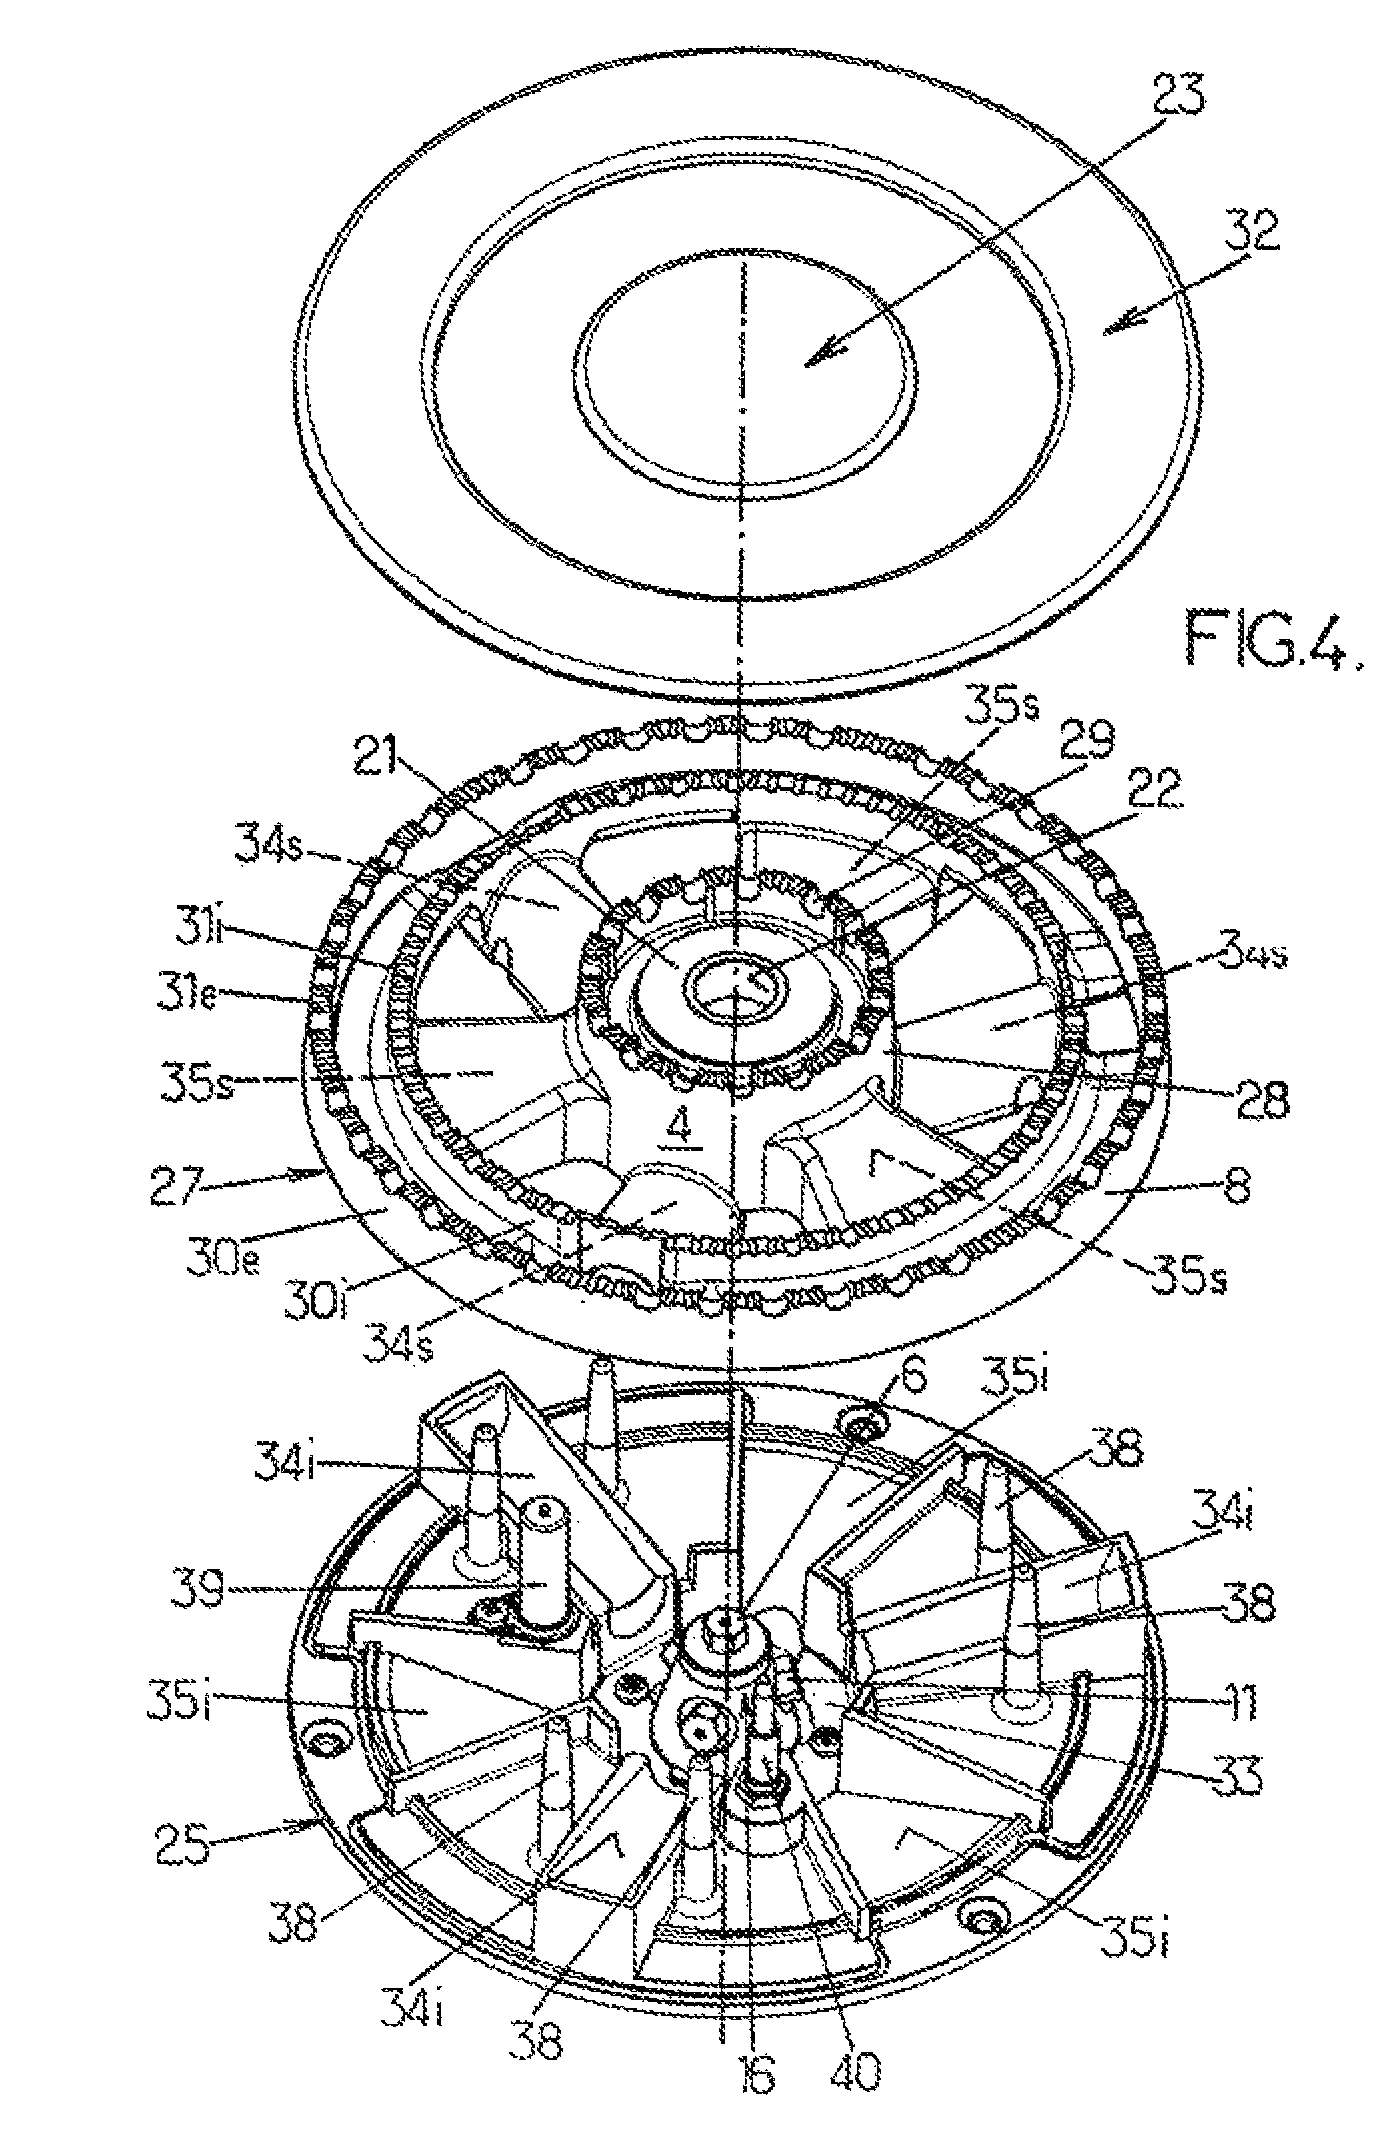 Gas burner with multiple concentric flame rings